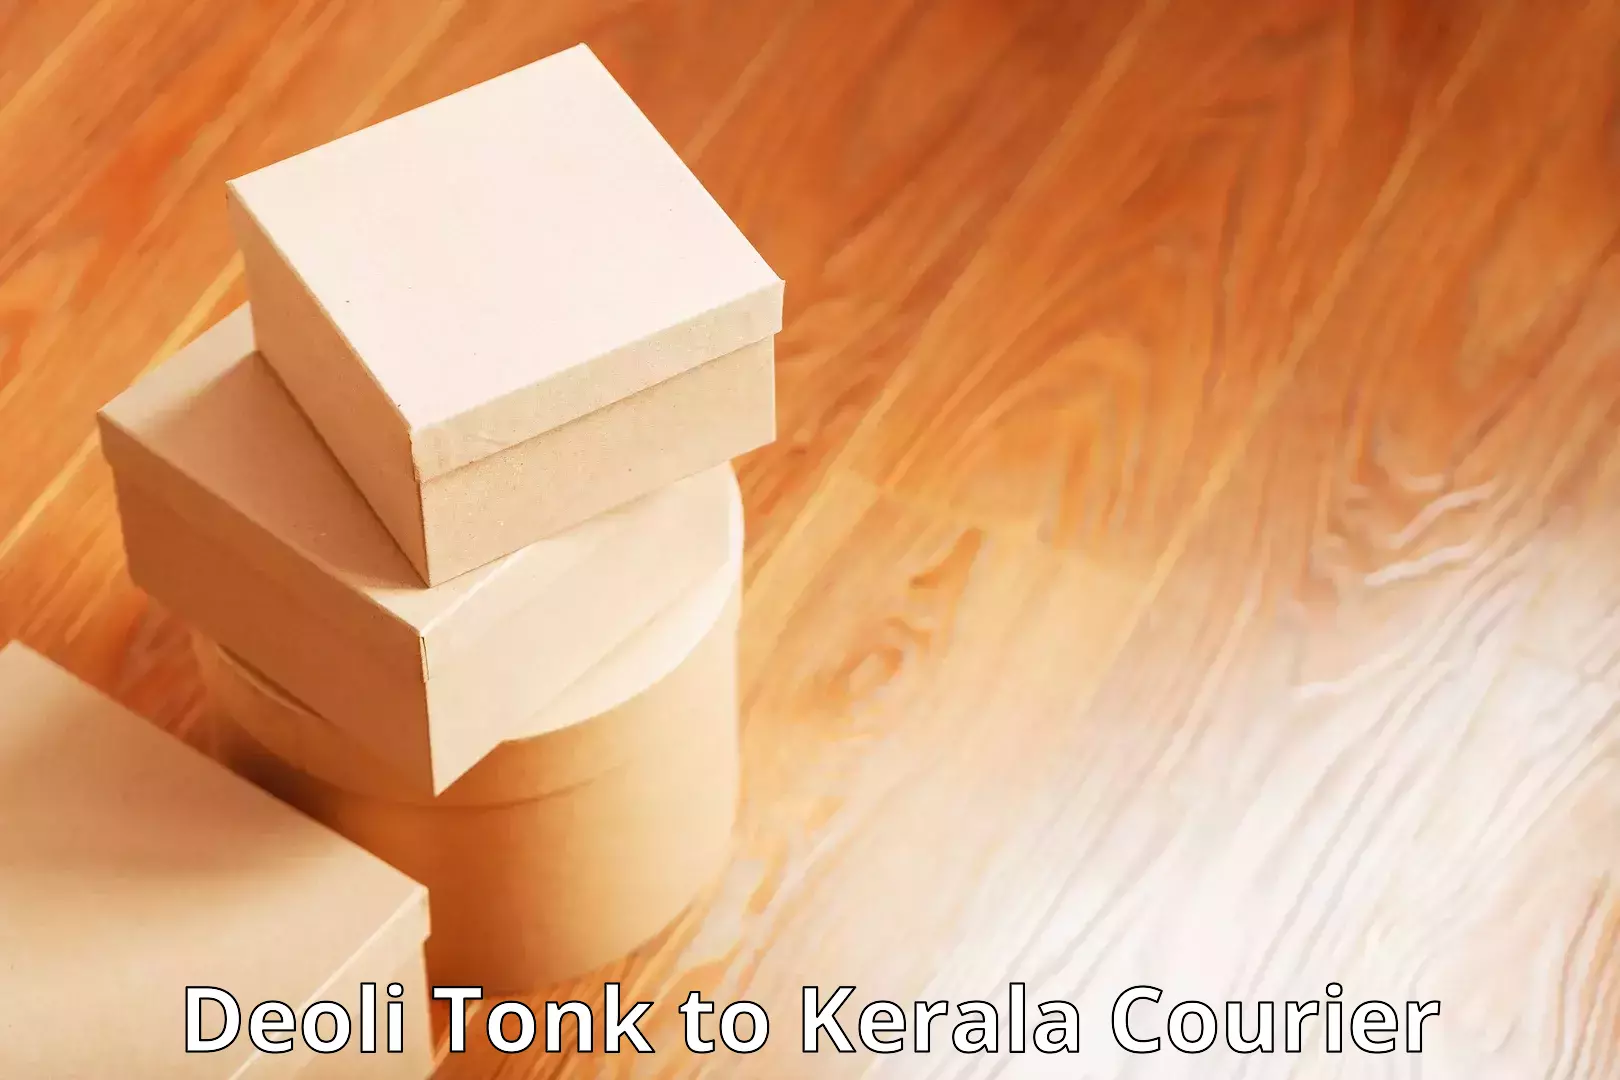 Easy access courier services Deoli Tonk to Perumbavoor